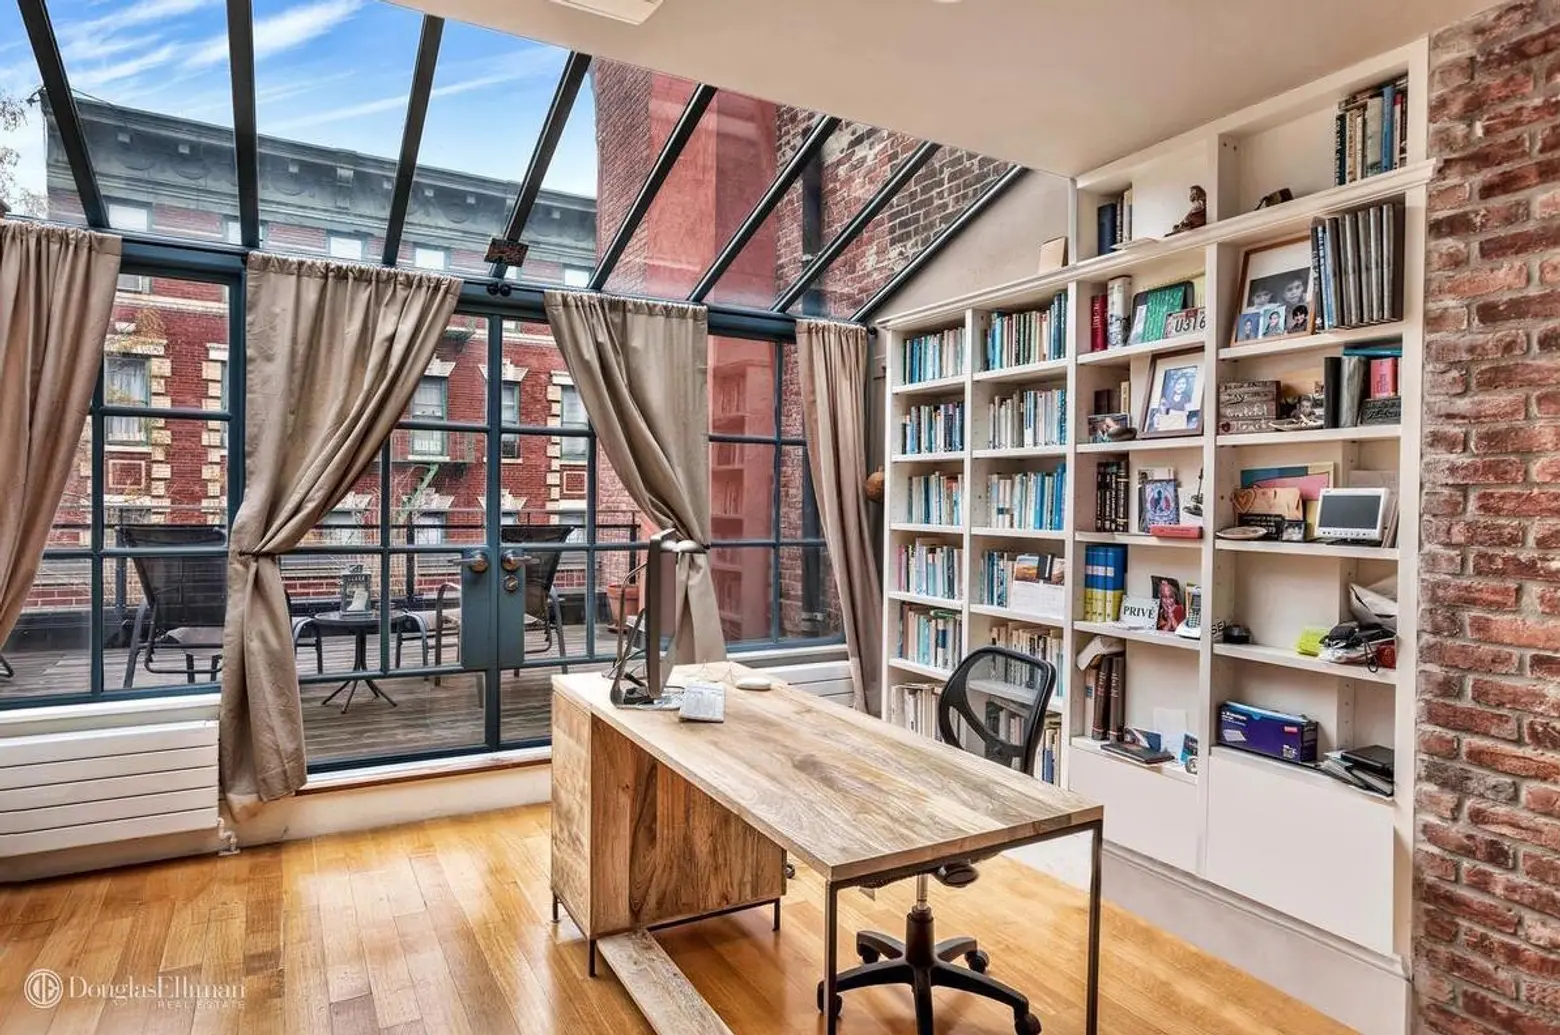 Sun worshippers: Rent this West Village townhouse with terraces and glass walls for $25K a month